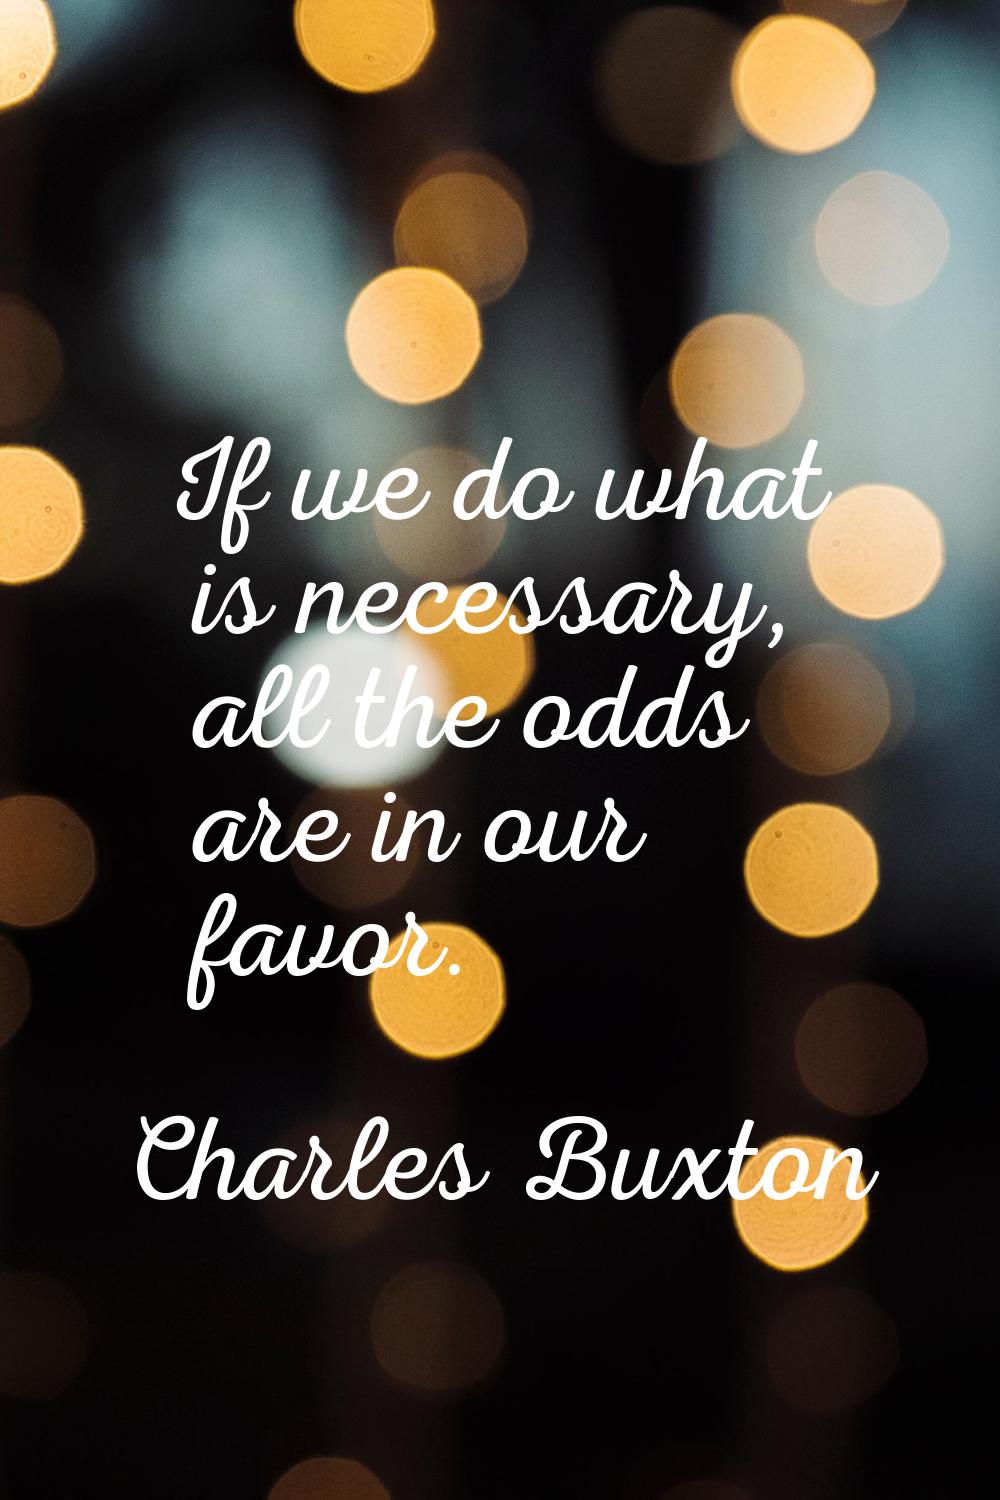 If we do what is necessary, all the odds are in our favor.